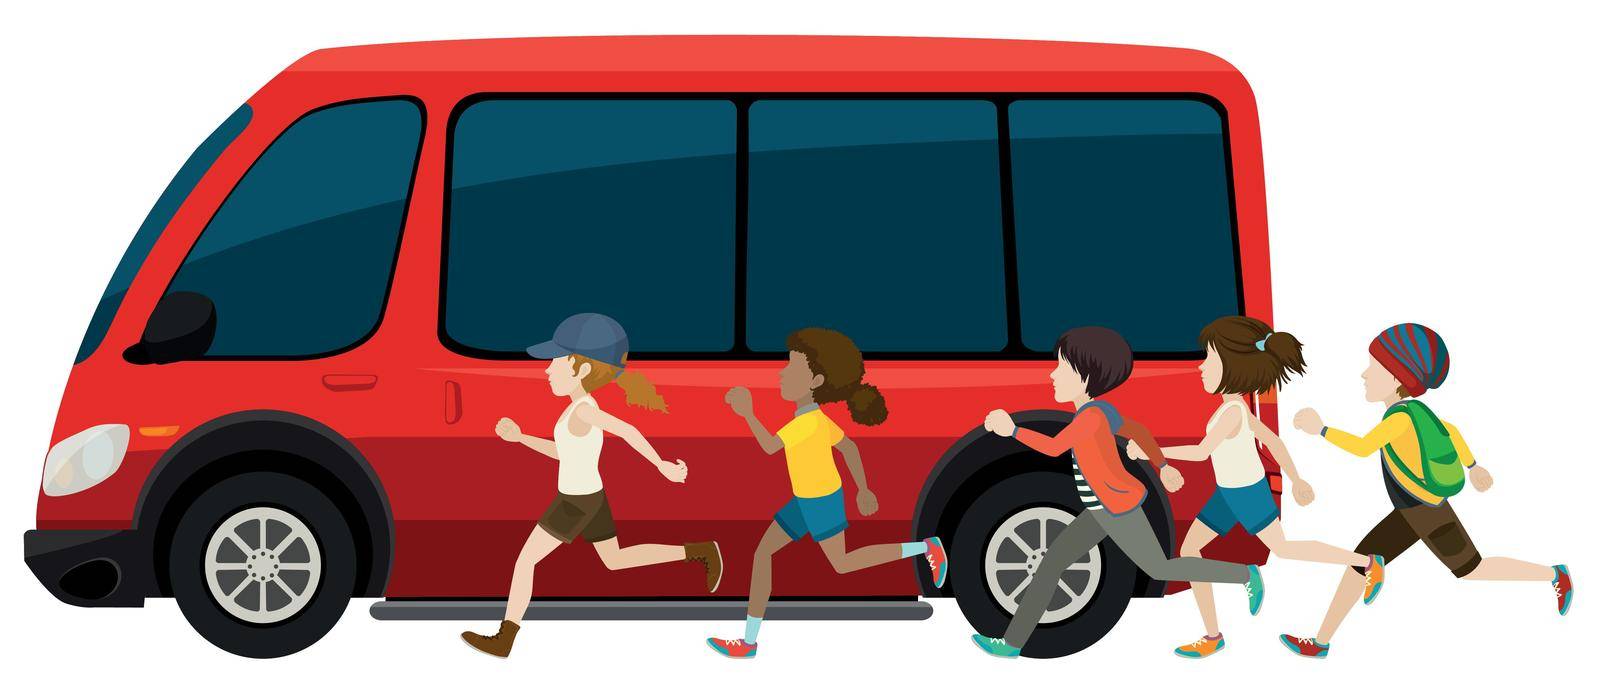 Side view of a red vehicle with people running by